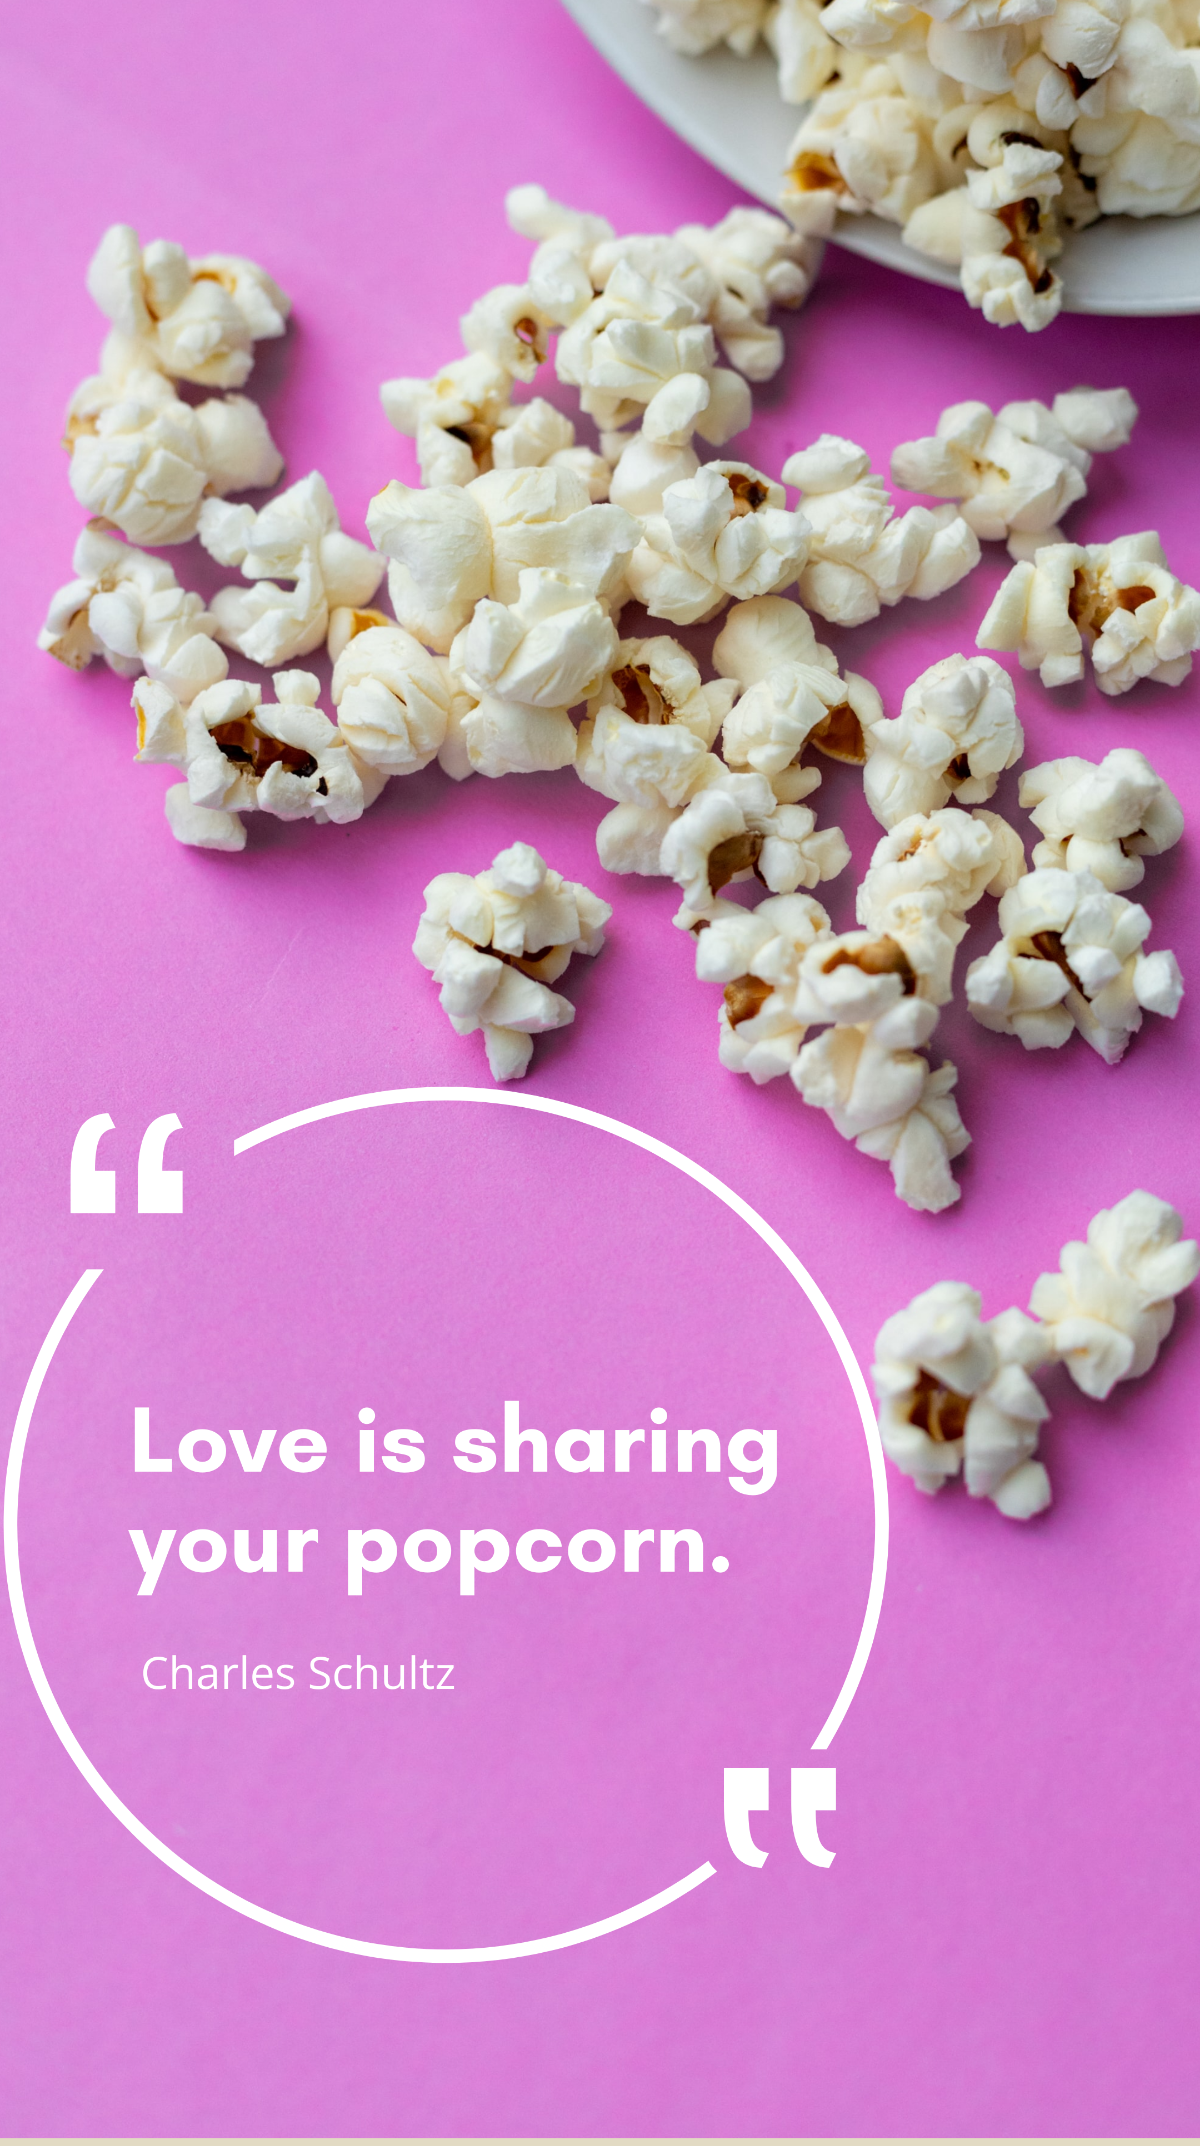 Charles Schultz - “Love is sharing your popcorn.” Template